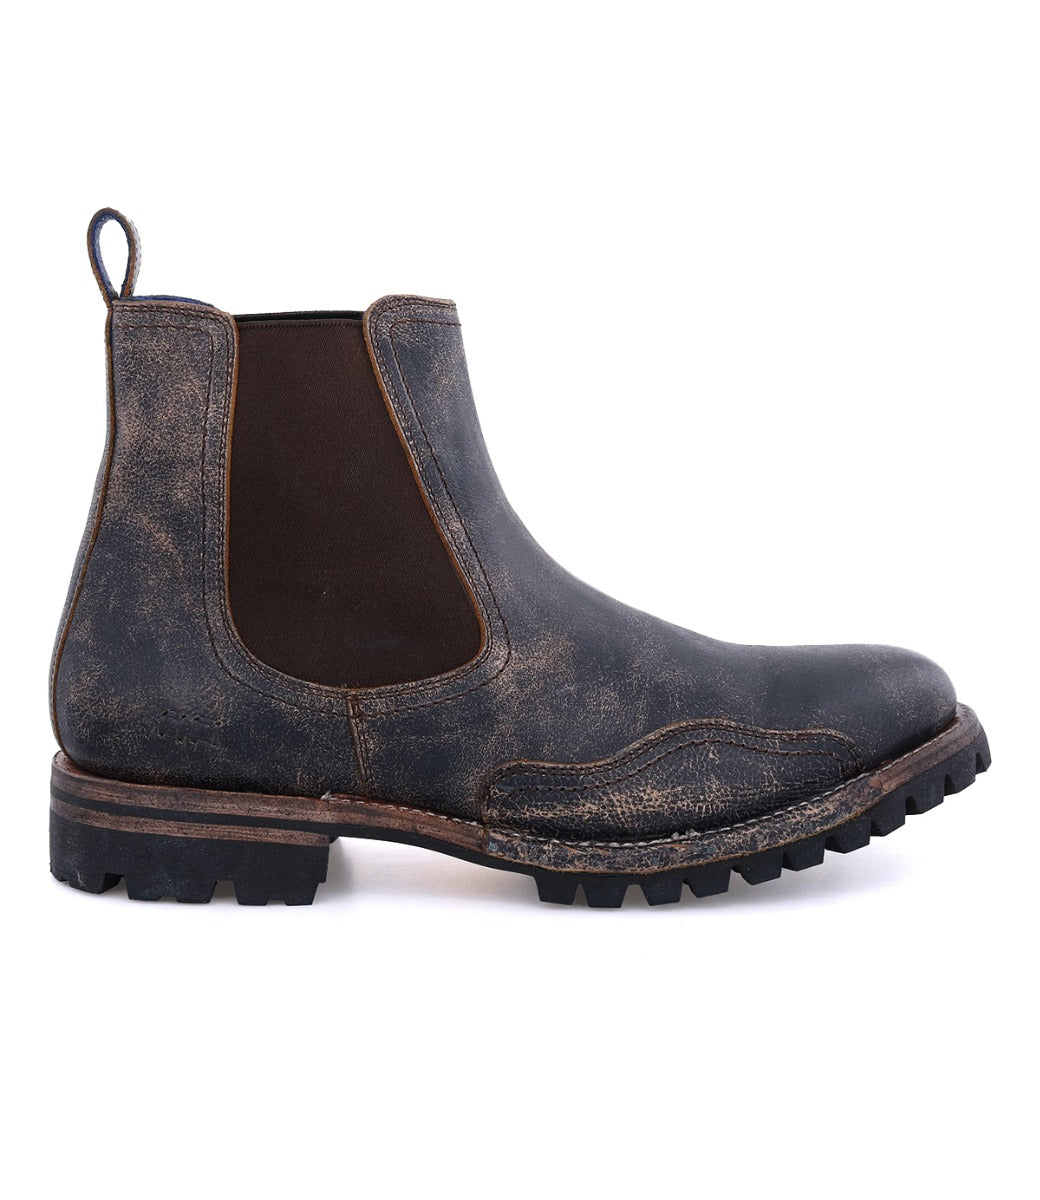 The Bed Stu Brady Trek men's brown chelsea boots on a white background.